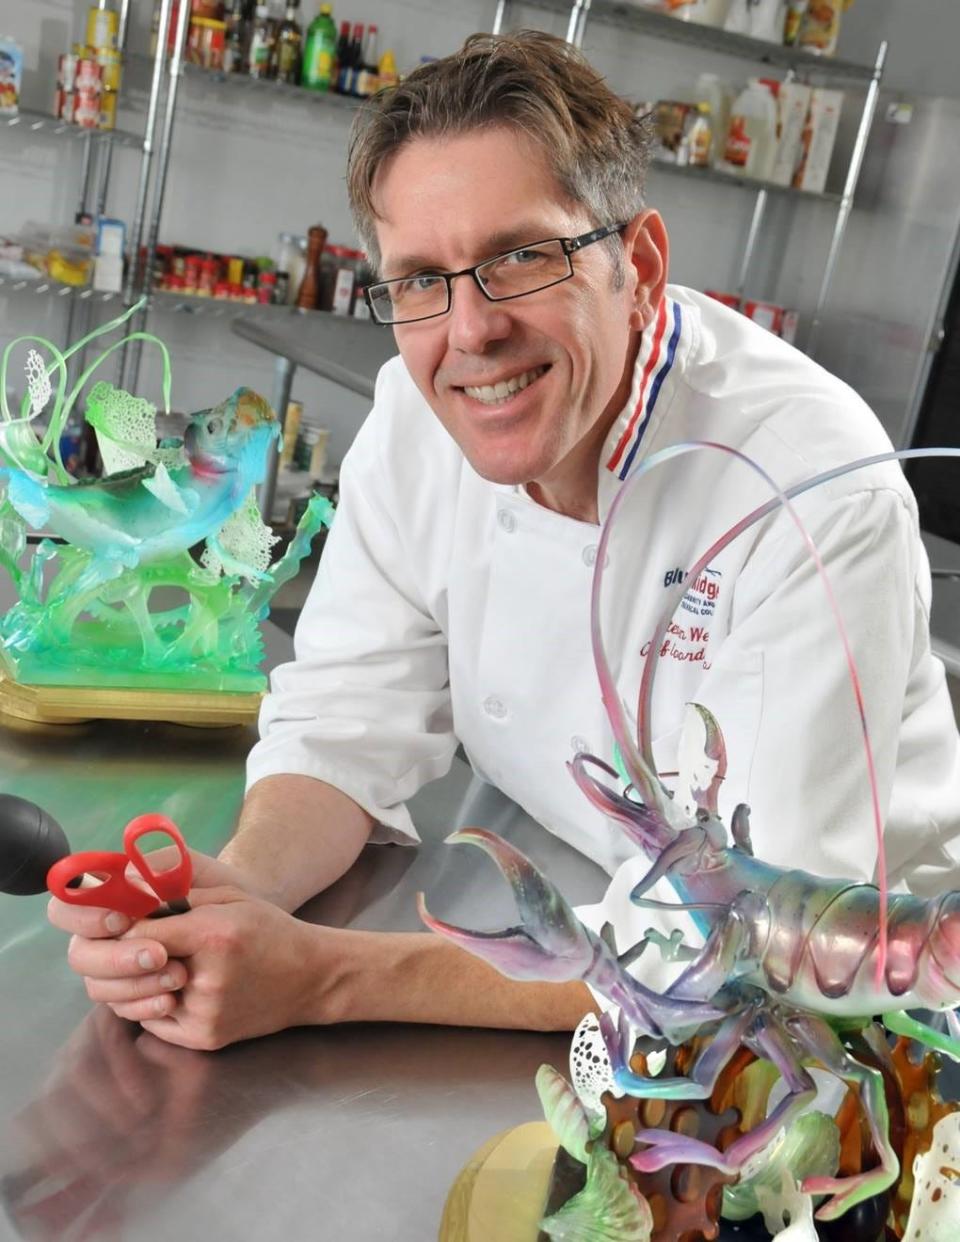 Chef Steve Weiss, associate dean of Culinary Arts and Hospitality for Blue Ridge Community and Technical College in Martinsburg, W.Va., will have his students design sugar sculptures inspired by Bouke de Vries’ work.